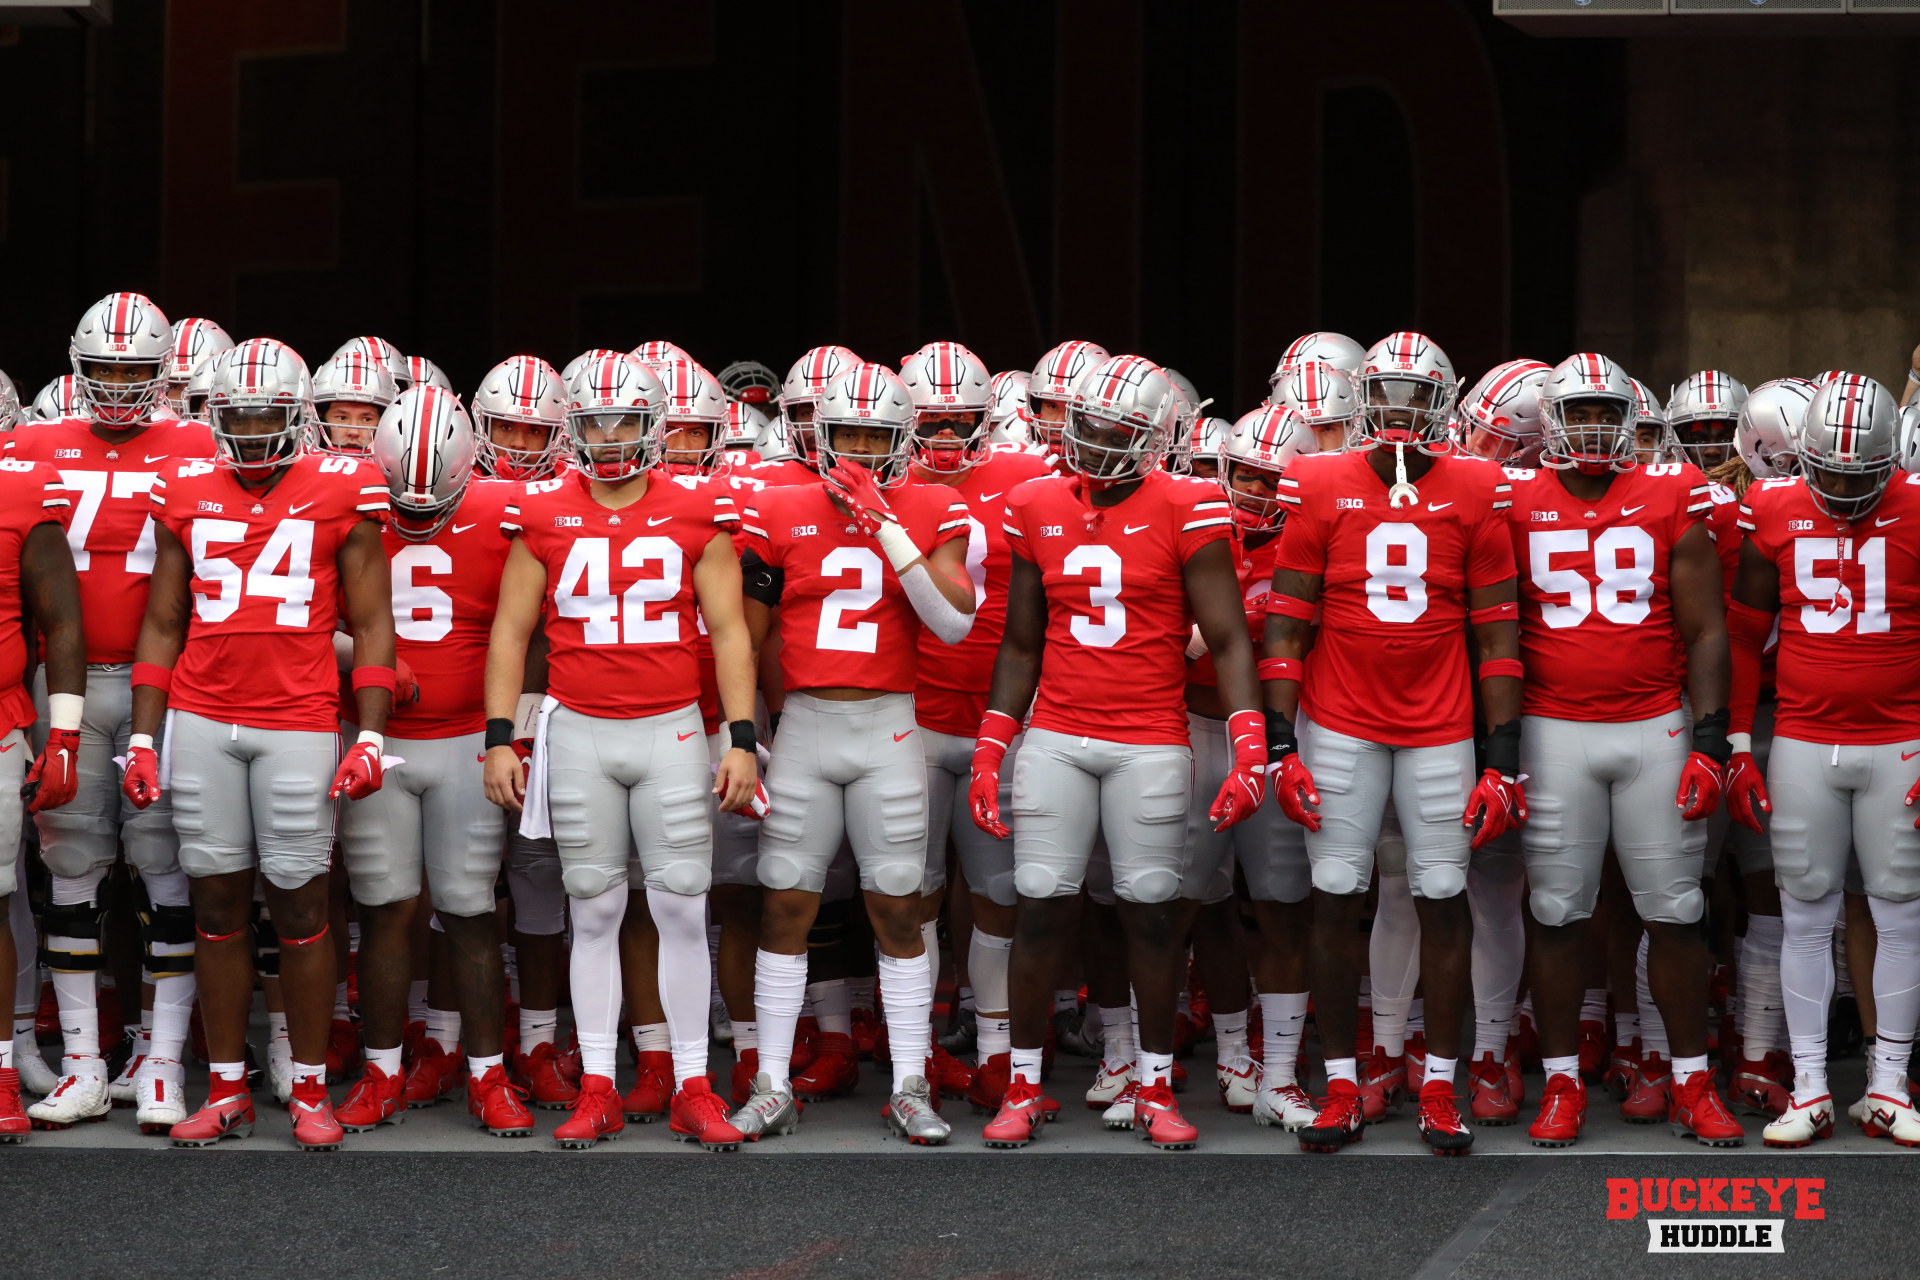 50 For 50: Buckeyes In Line To Win It All